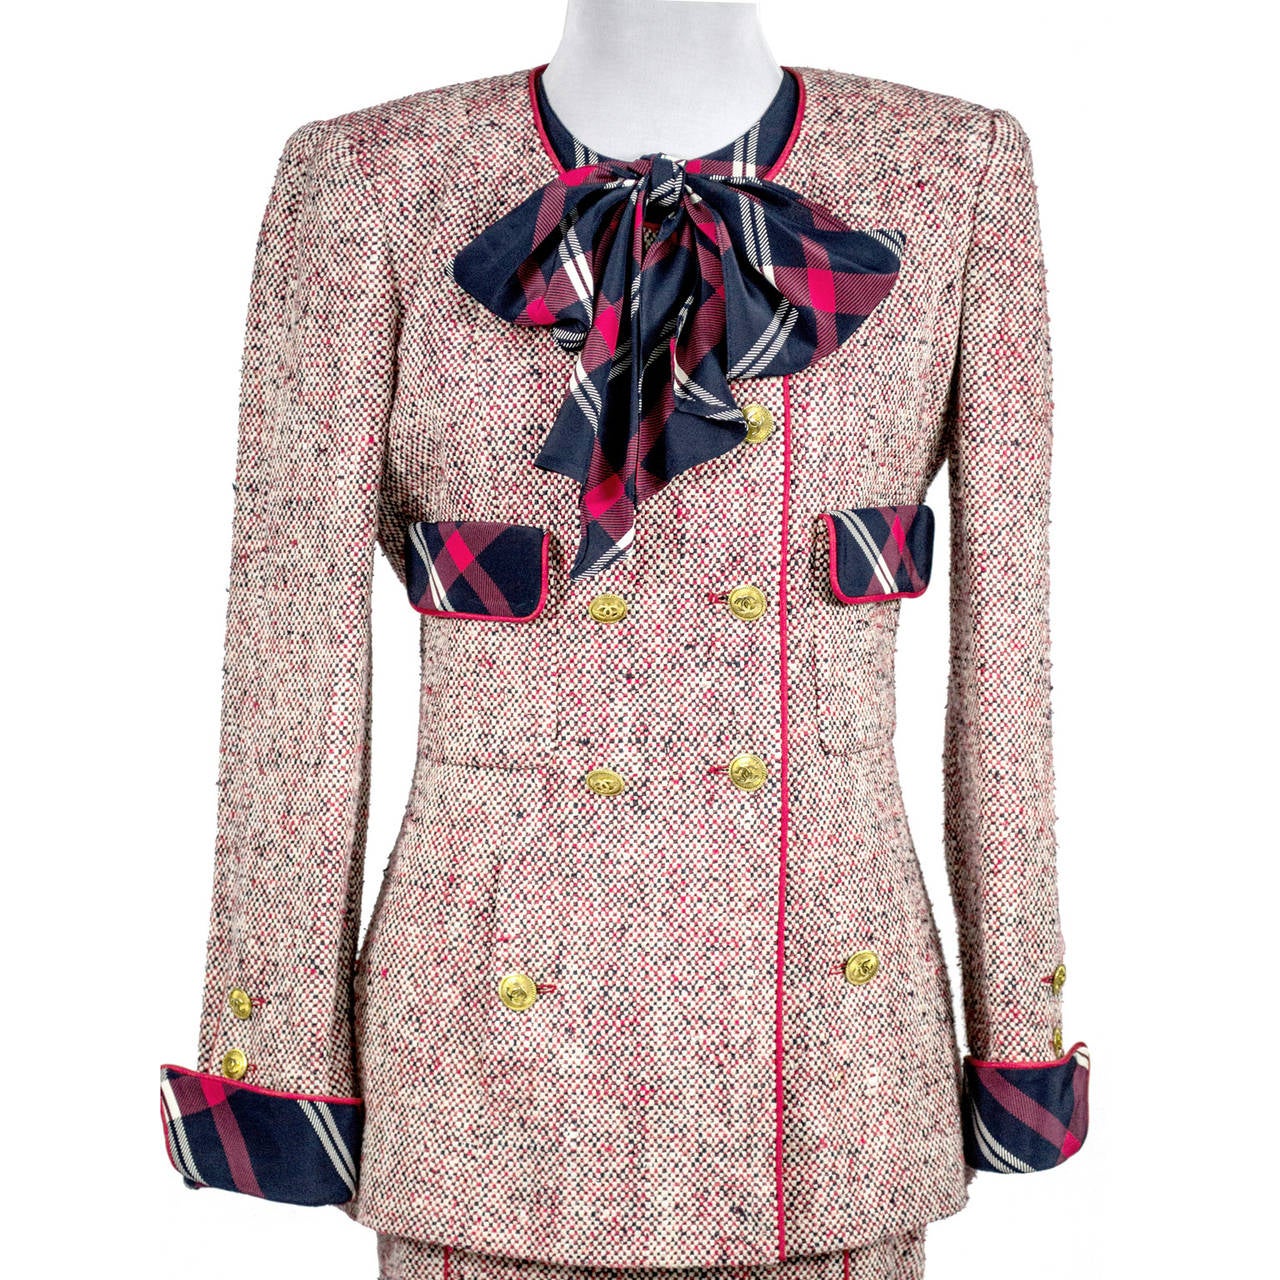 1985 Chanel Runway Tweed With Skirt Blazer & Silk Blouse Red White & Blue Plaid 2